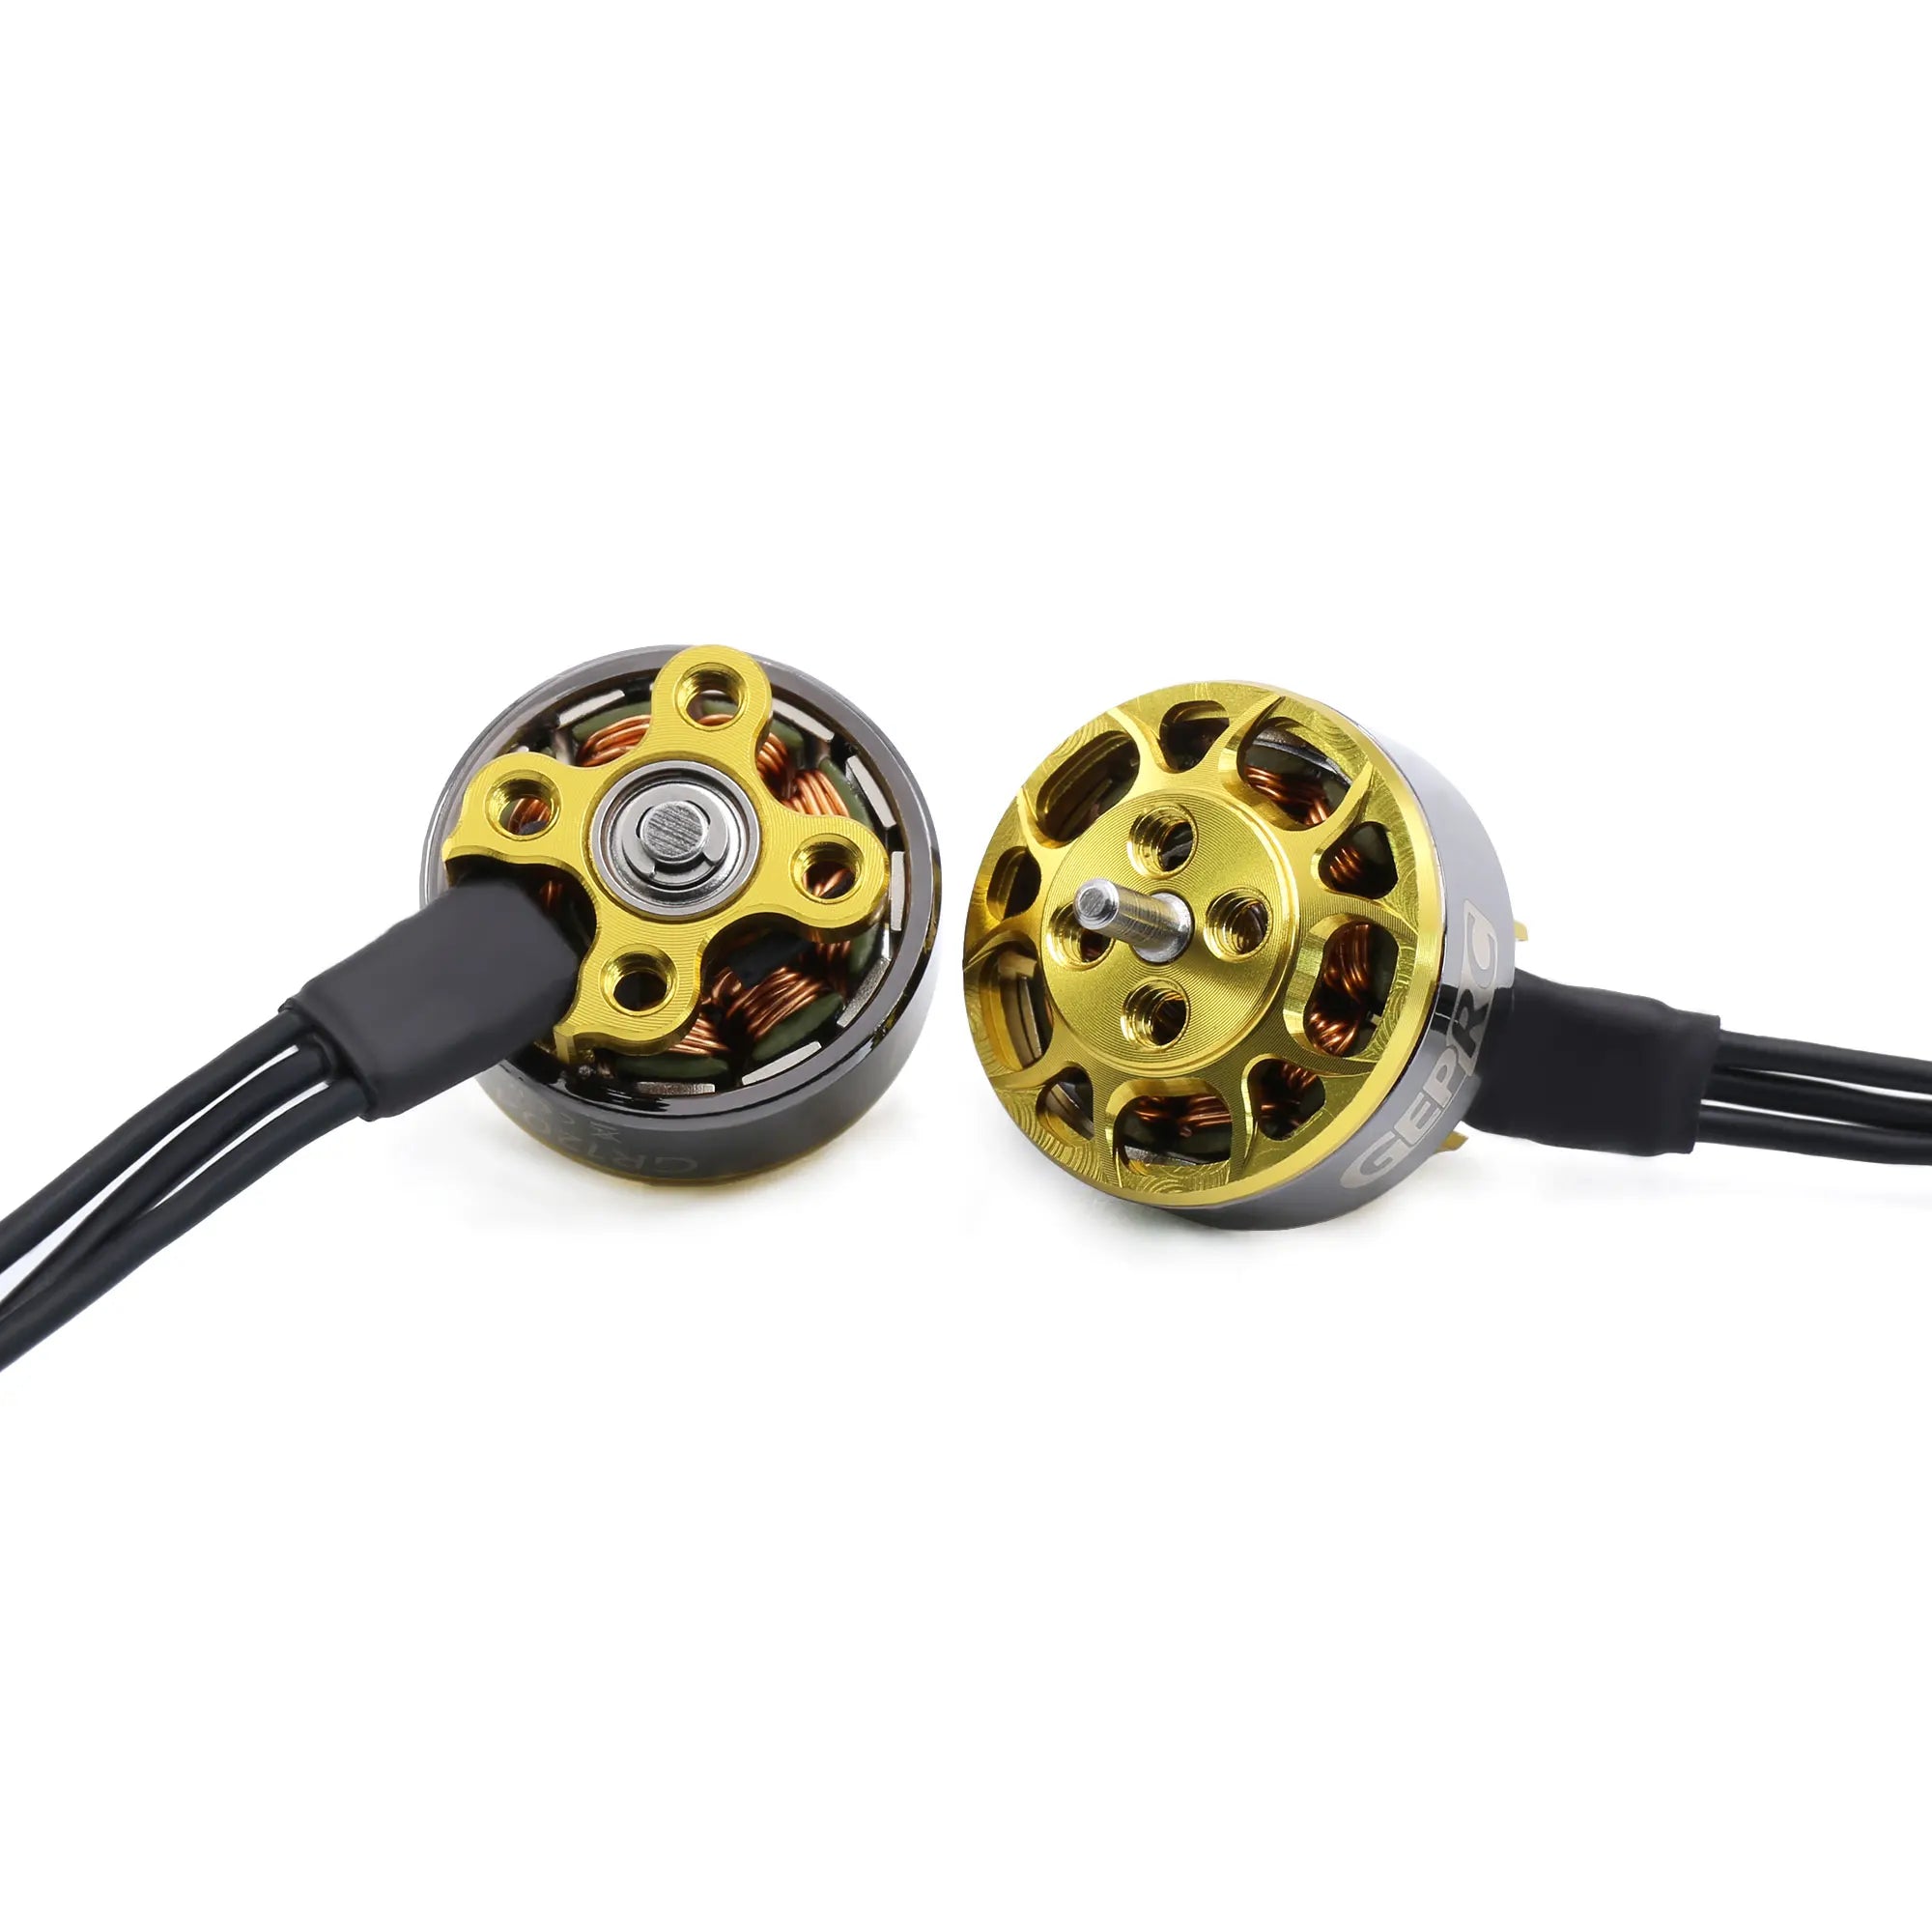 GEPRC GR1204 3750kv Motor, Compatible with 105mm-110mm RC Drone(Whoop Drone and